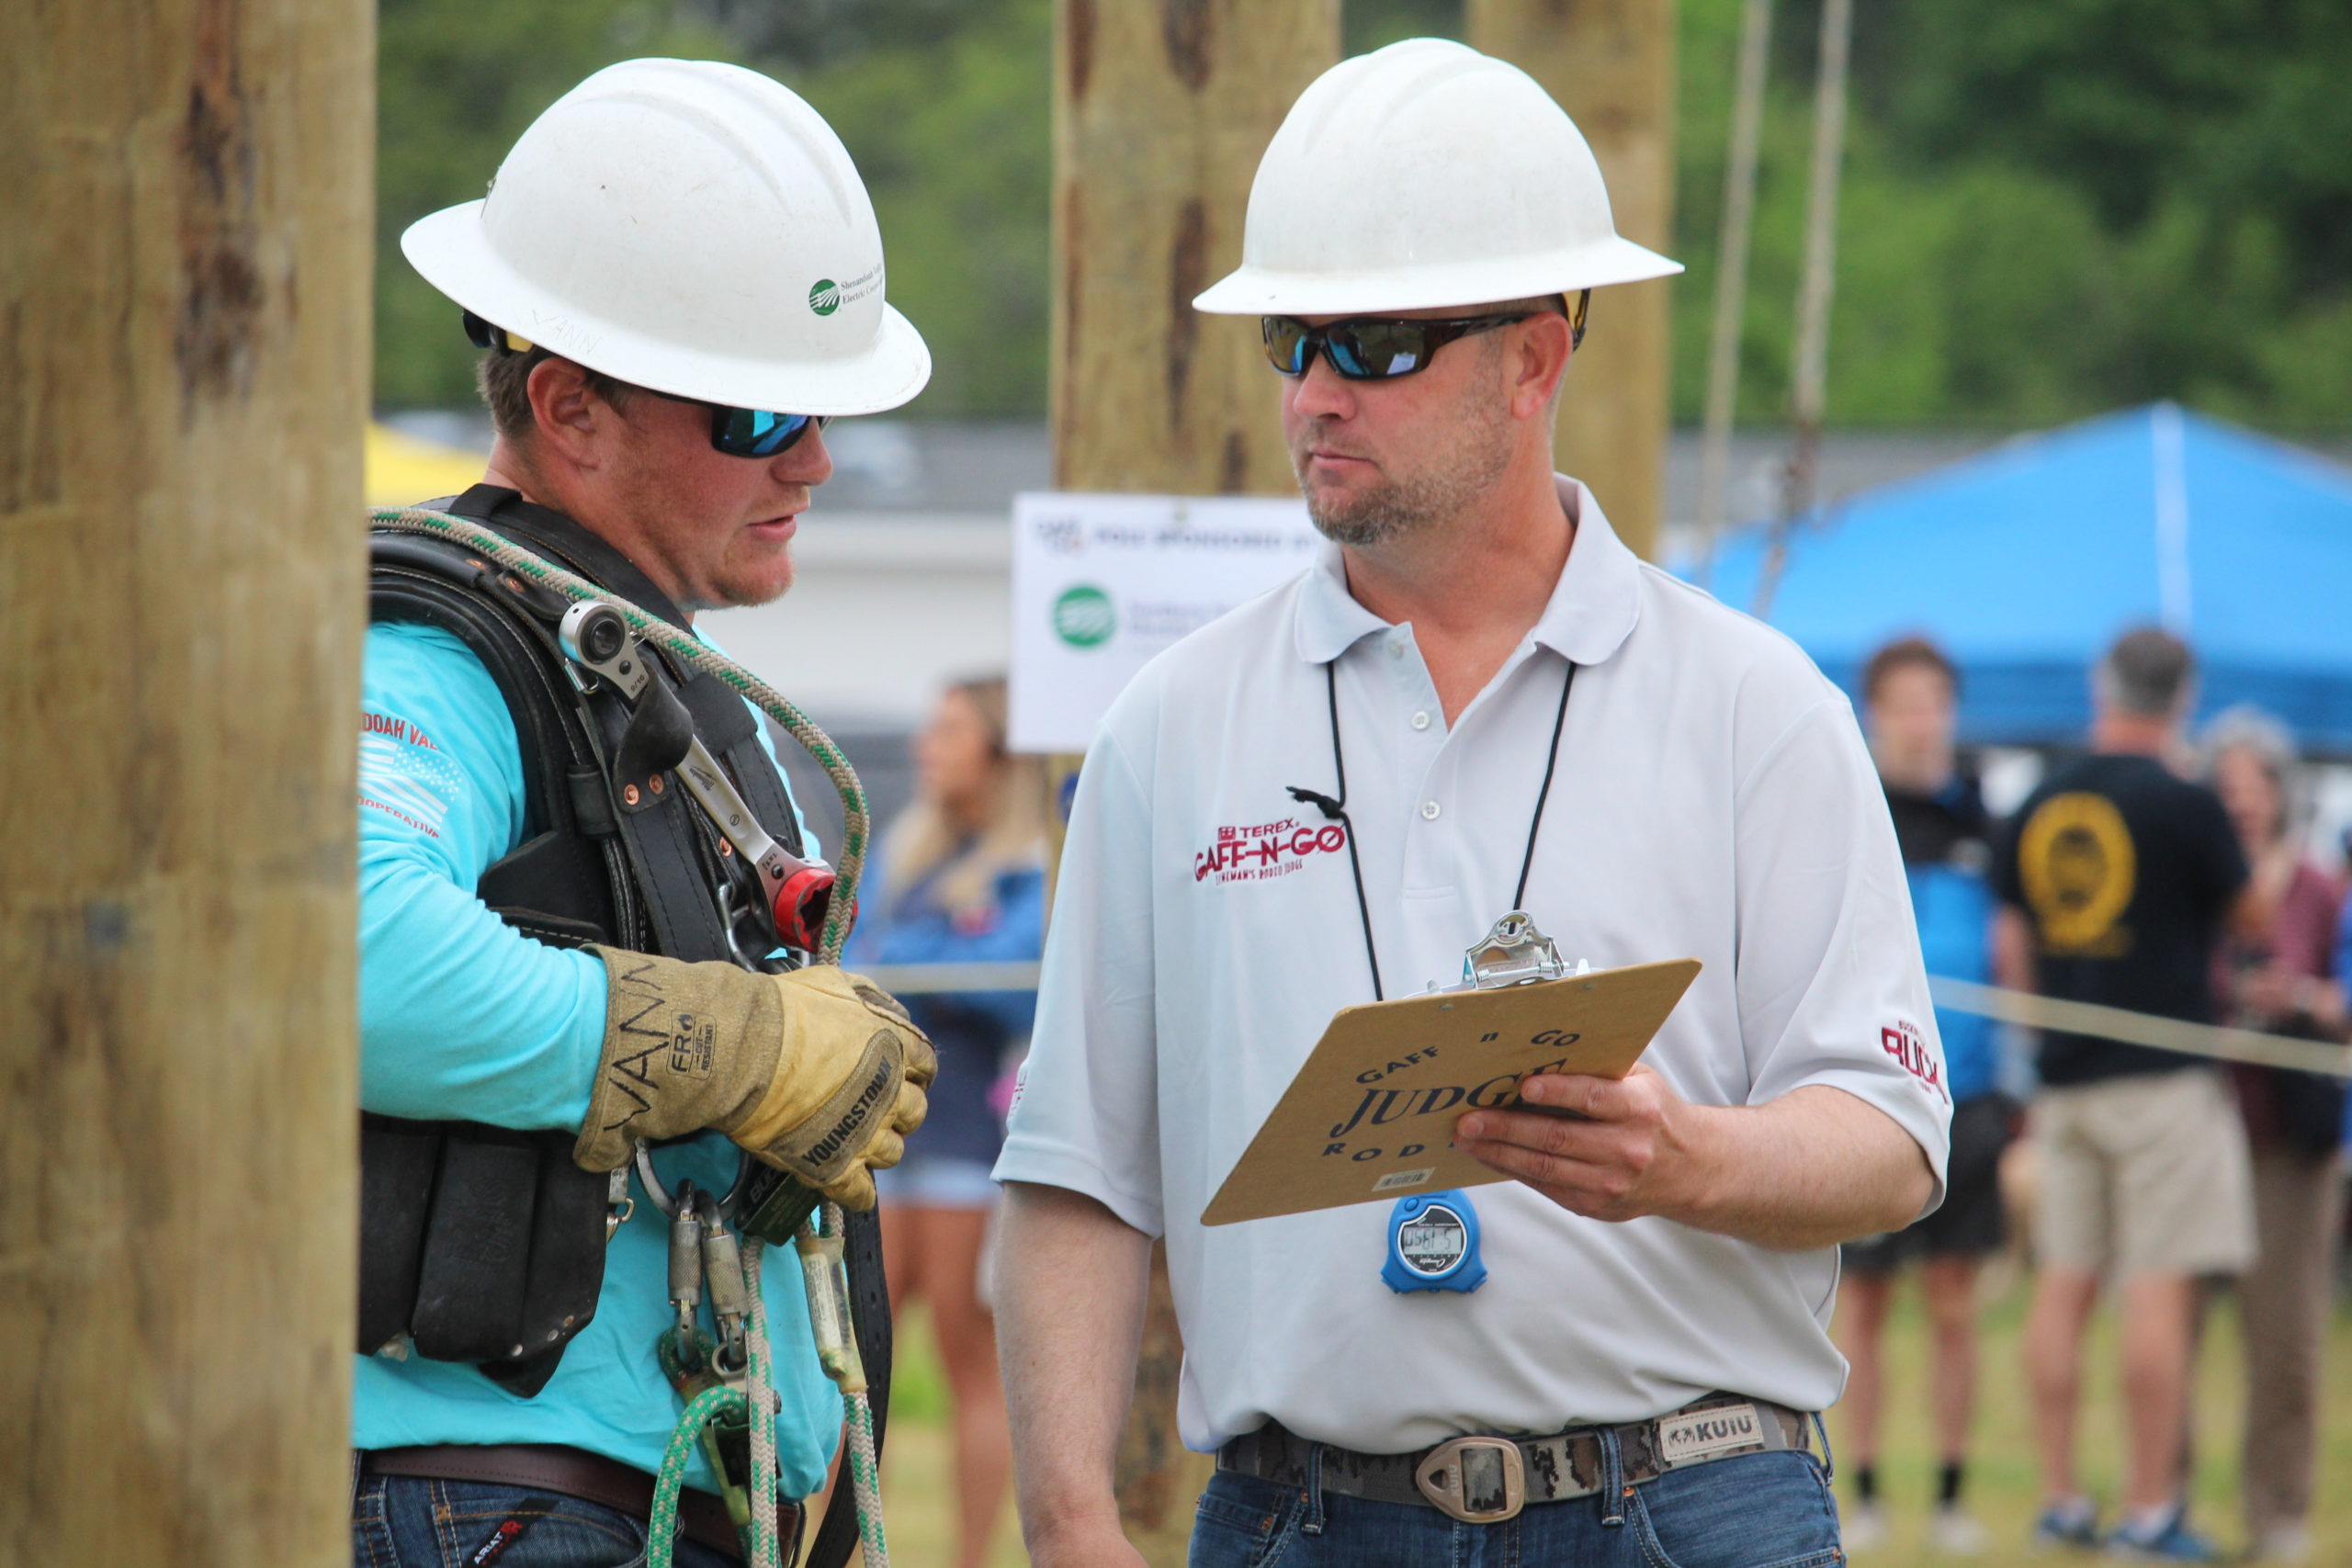 Shenandoah Valley Electric Cooperative competitor takes a moment to get briefed by a rodeo judge.